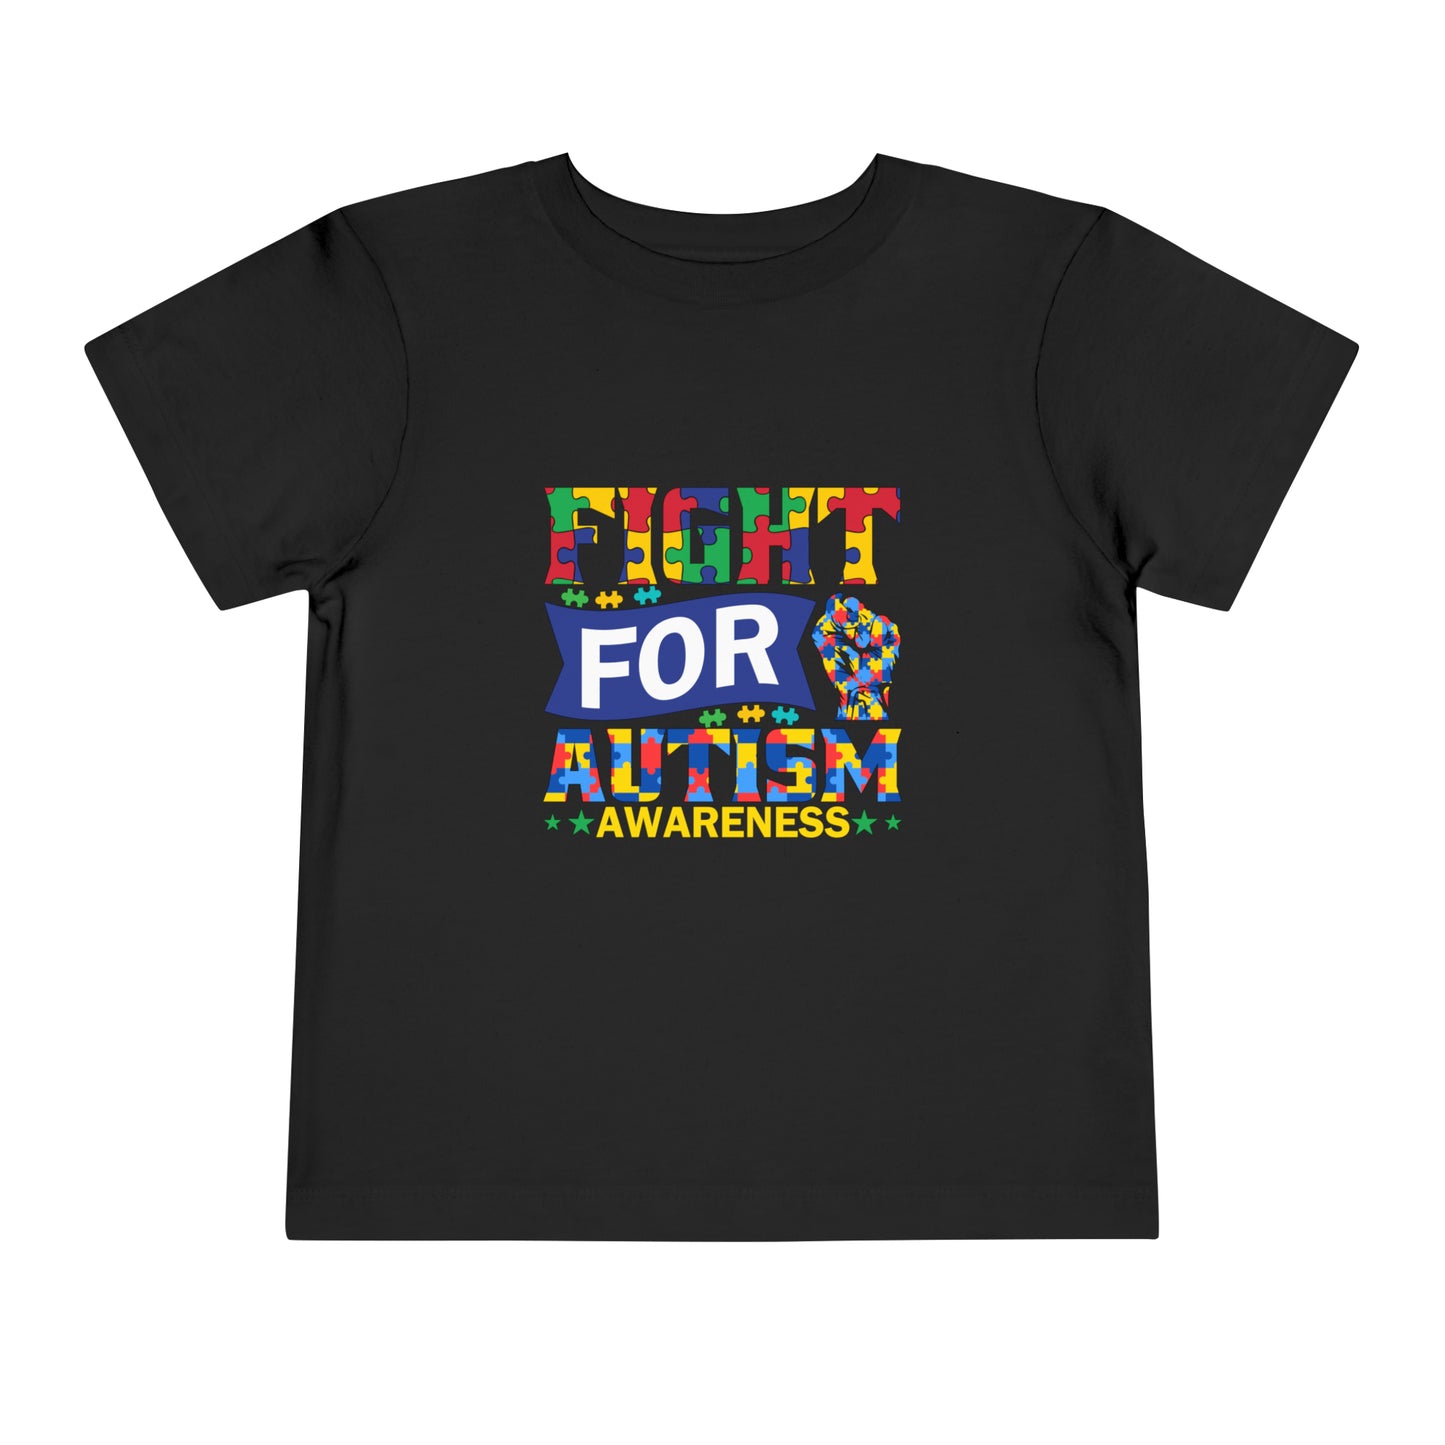 Fight for autism awareness Autism Acceptance Awareness Advocate Toddler Short Sleeve Tee